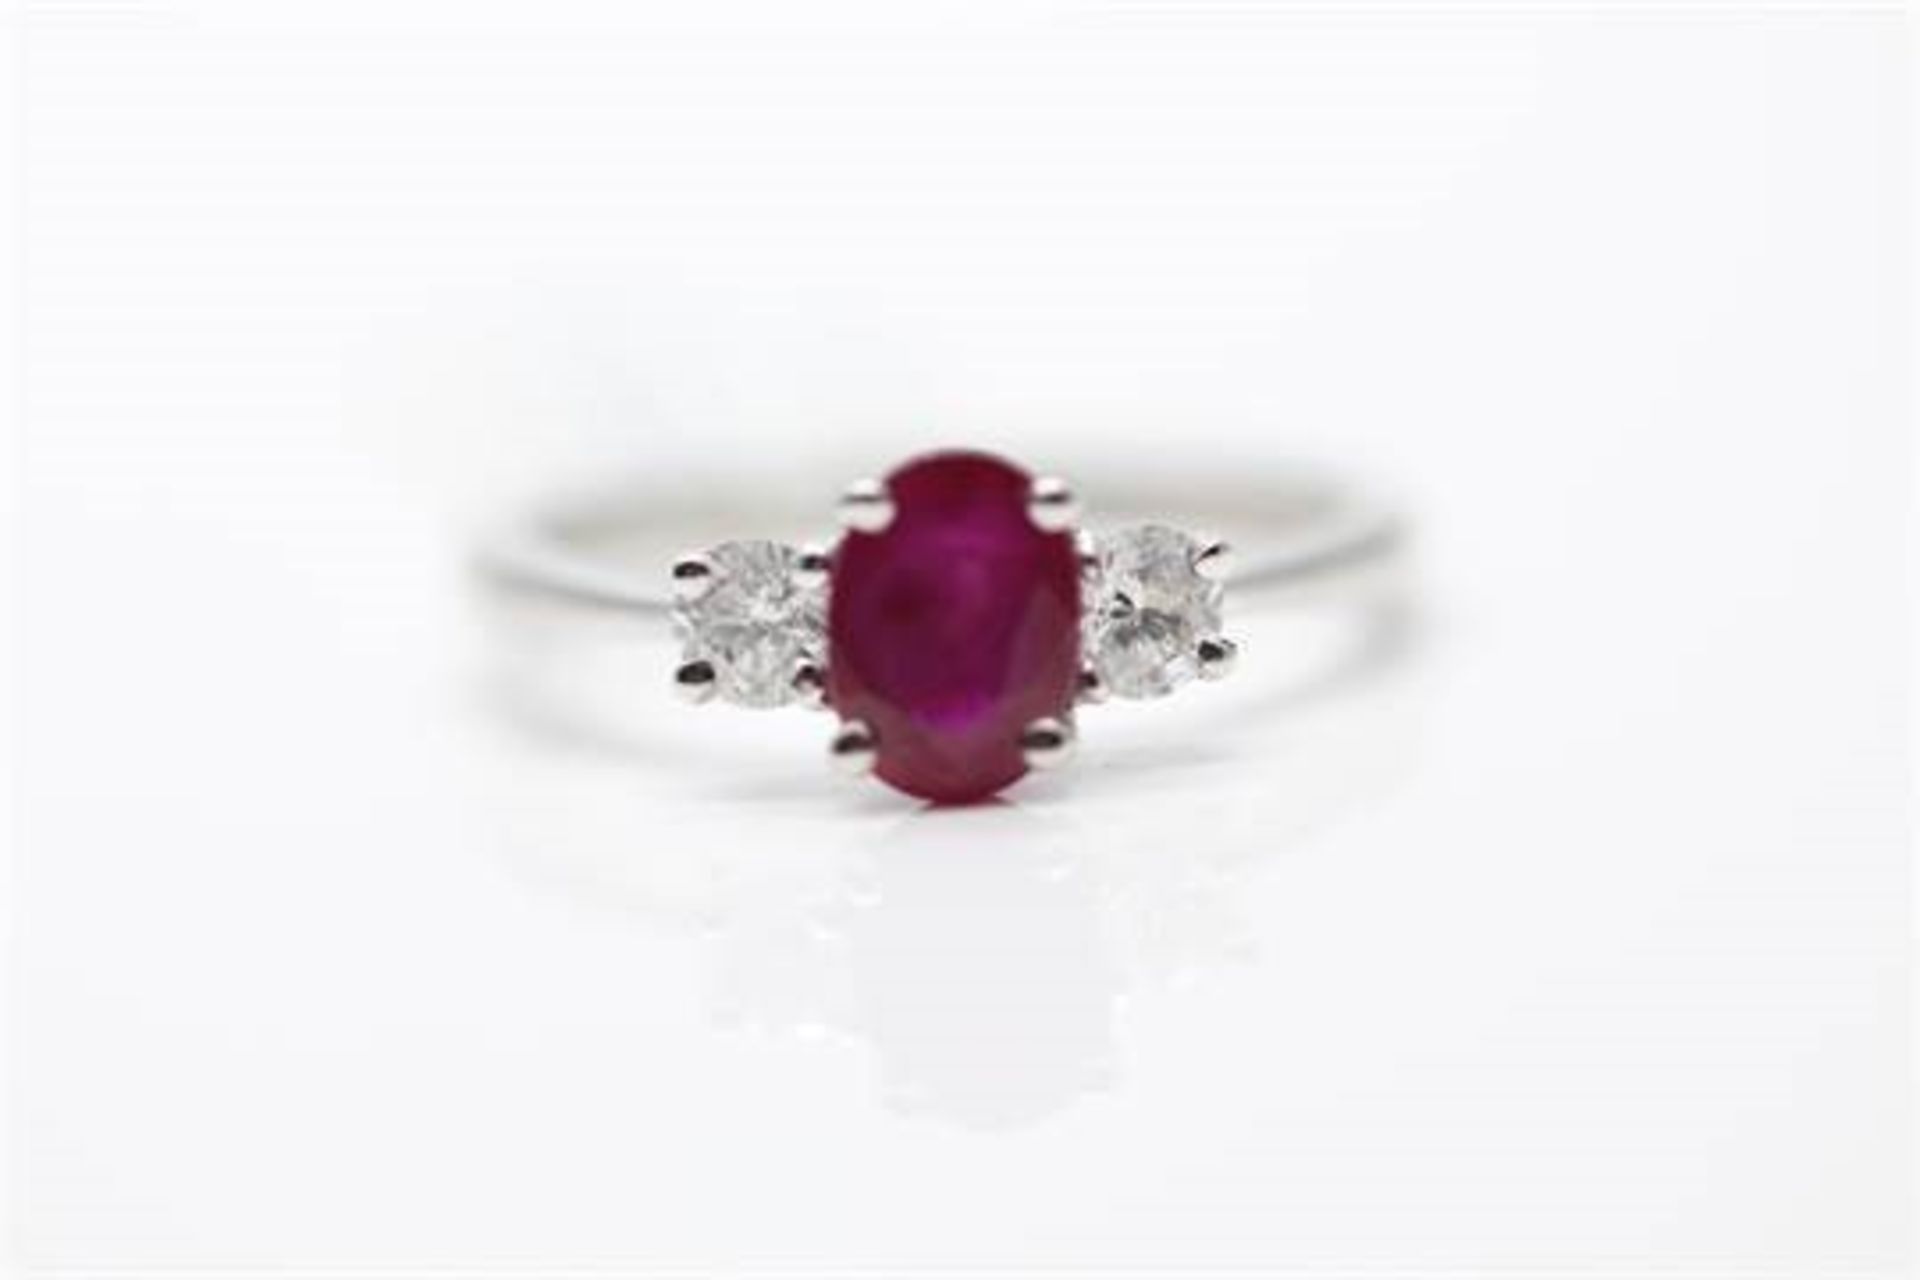 18Ct White Gold Ladies Ruby And Diamond Ring, Set With One 1.08 Carat Ruby, Diamond Weight- 0.32